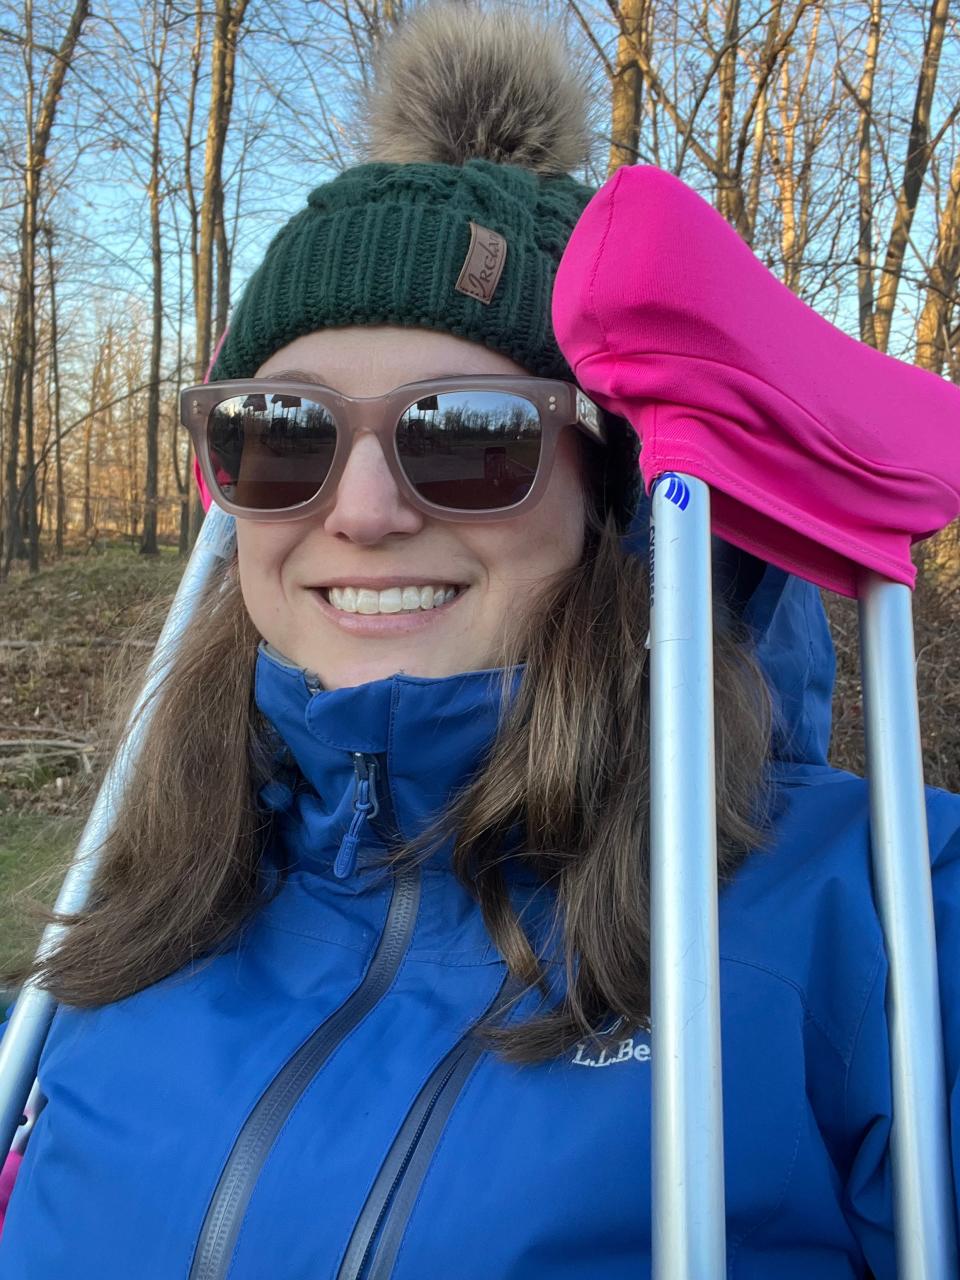 Reporter Jennifer Pignolet on a short walk with crutches following surgery to correct hip dysplasia last fall.